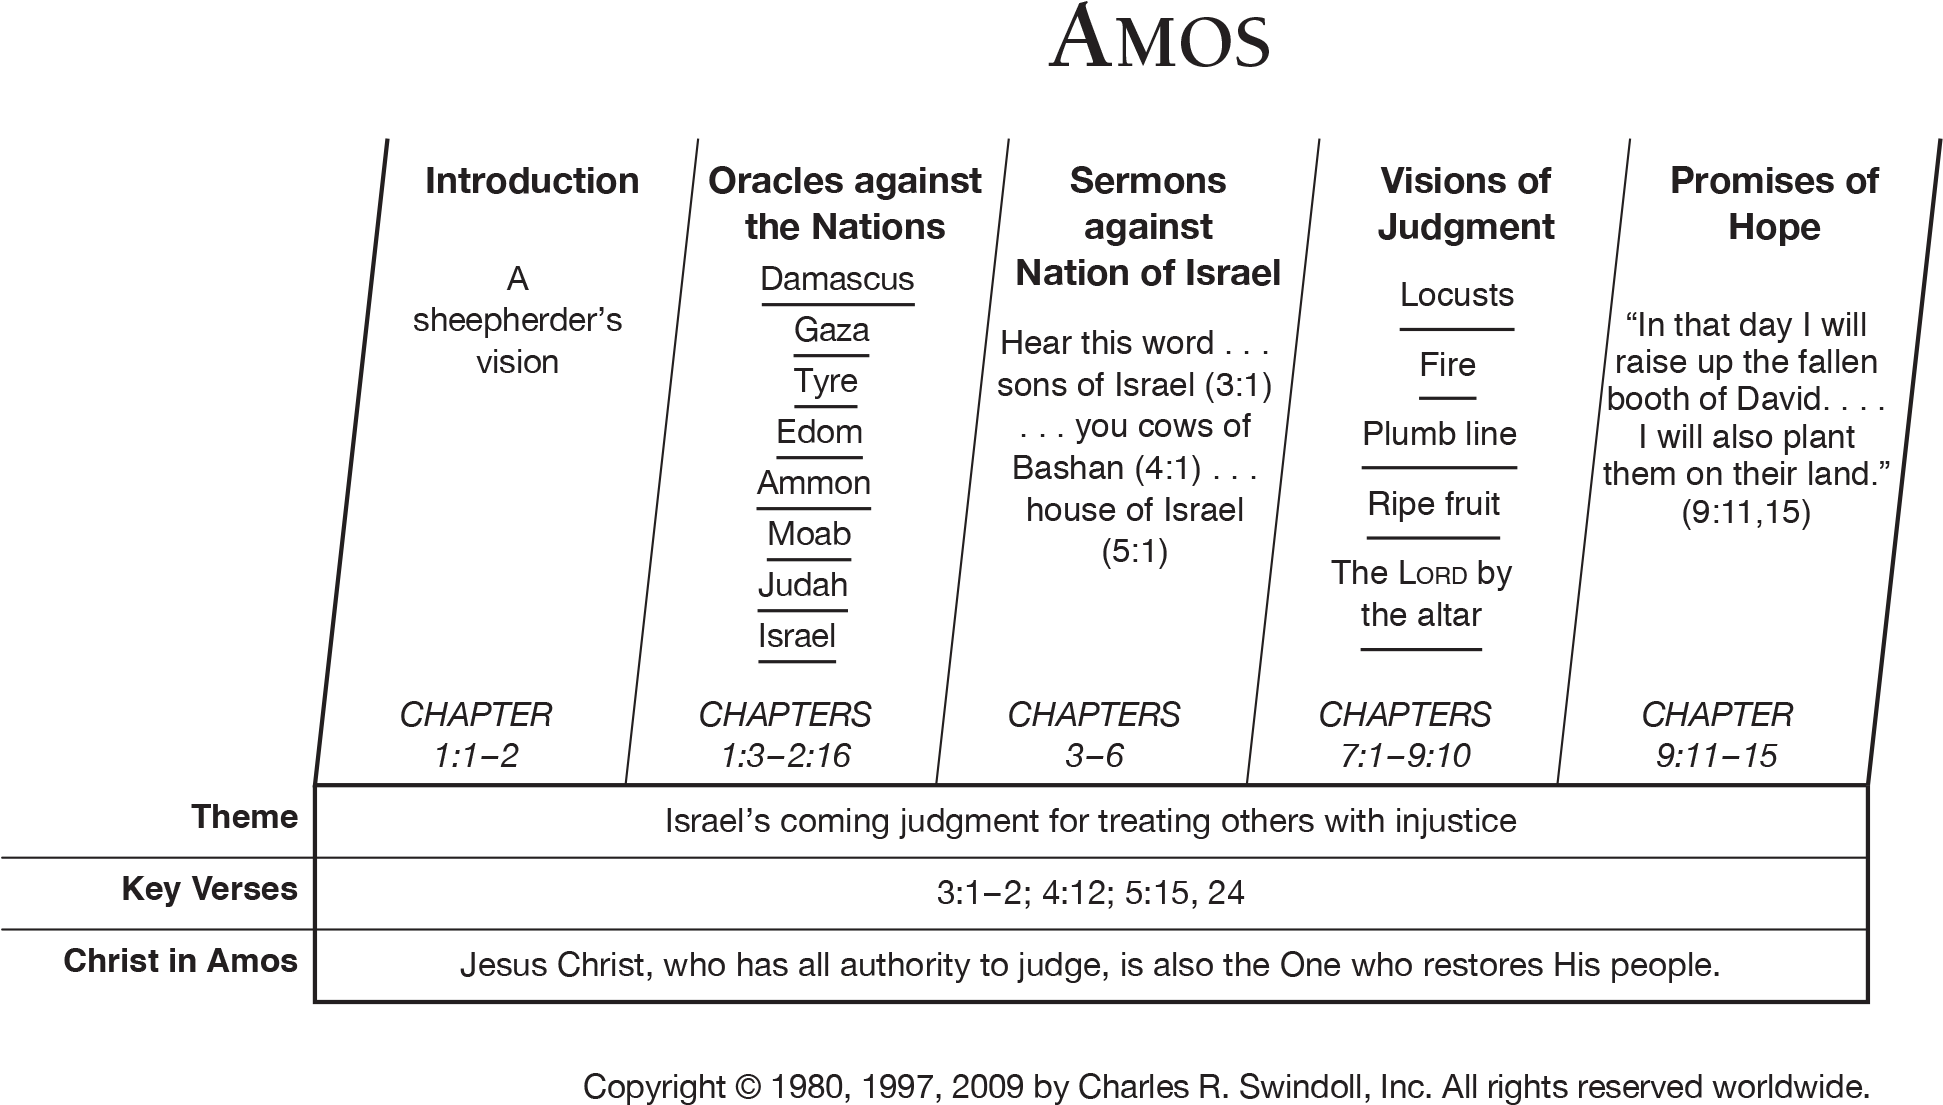 Download Amos Overview Chart - Document PNG Image with No Background ...